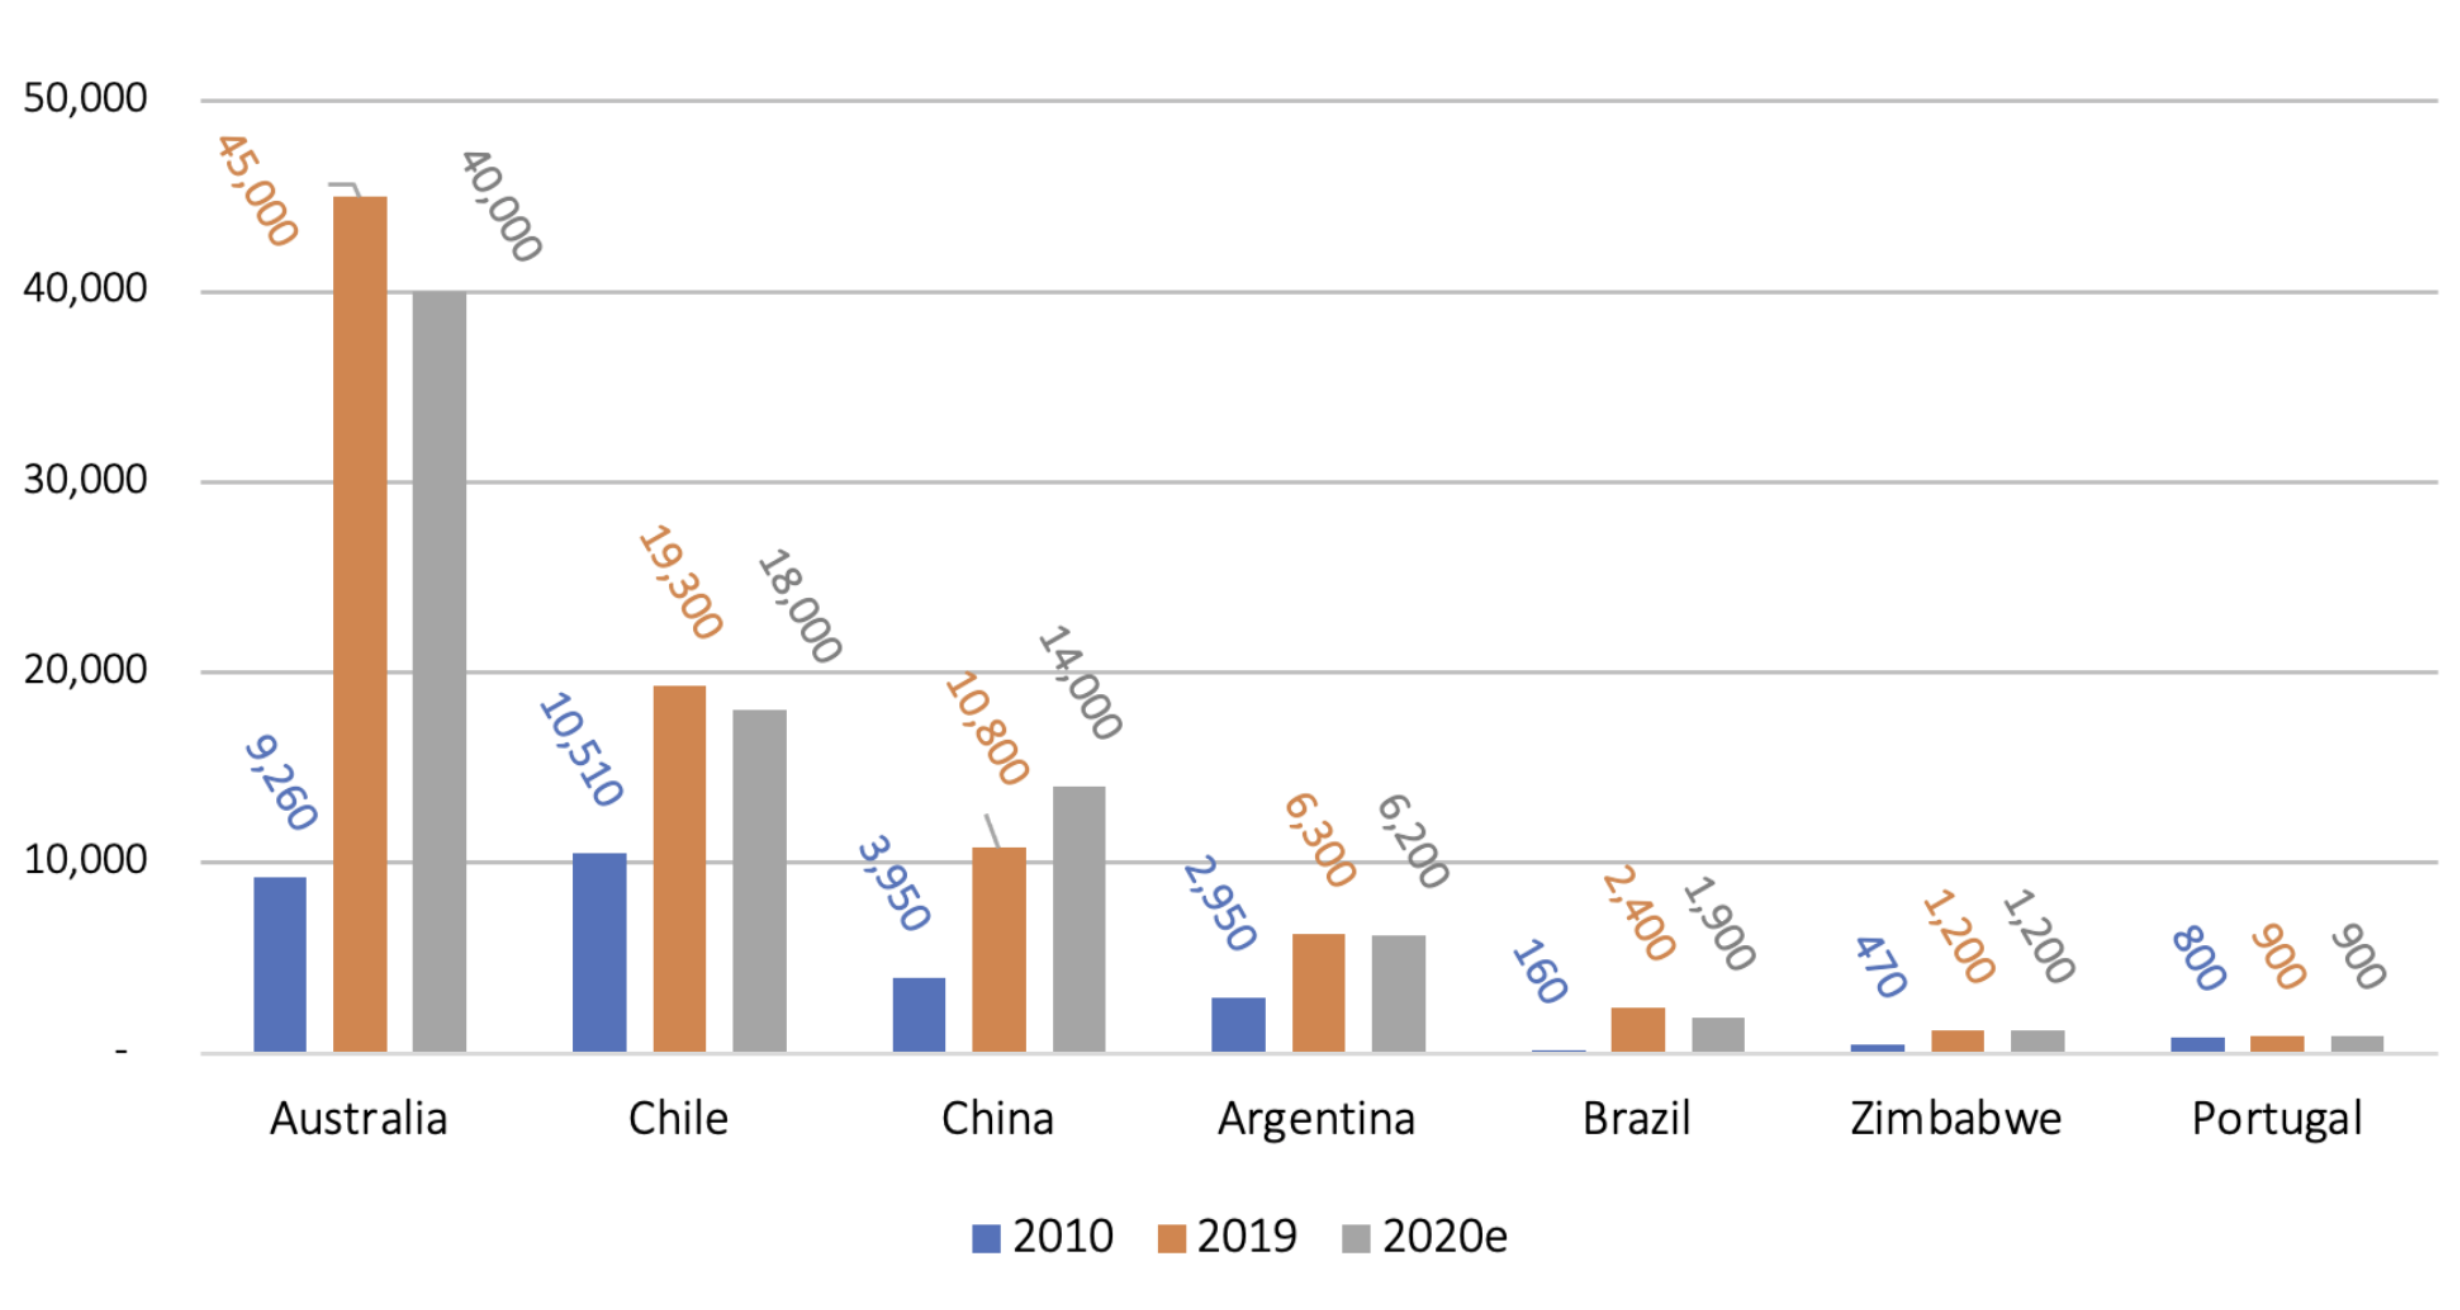 Cochilco, Yearbook: Copper and Other Mineral Statistics, 2000–2019. See endnote 11